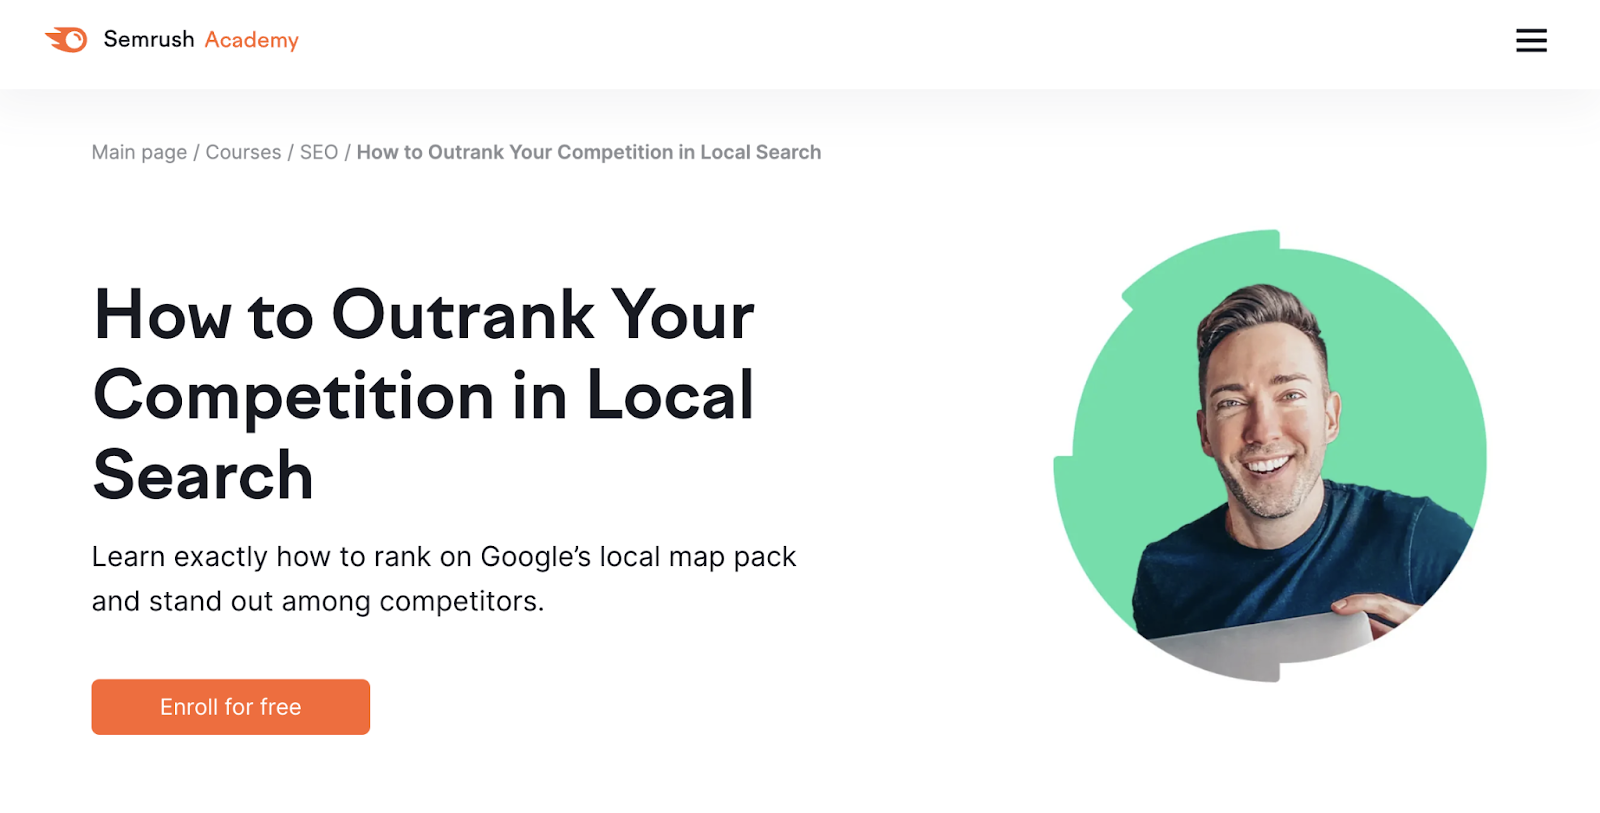 How to Outrank Your Competition in Local Search course